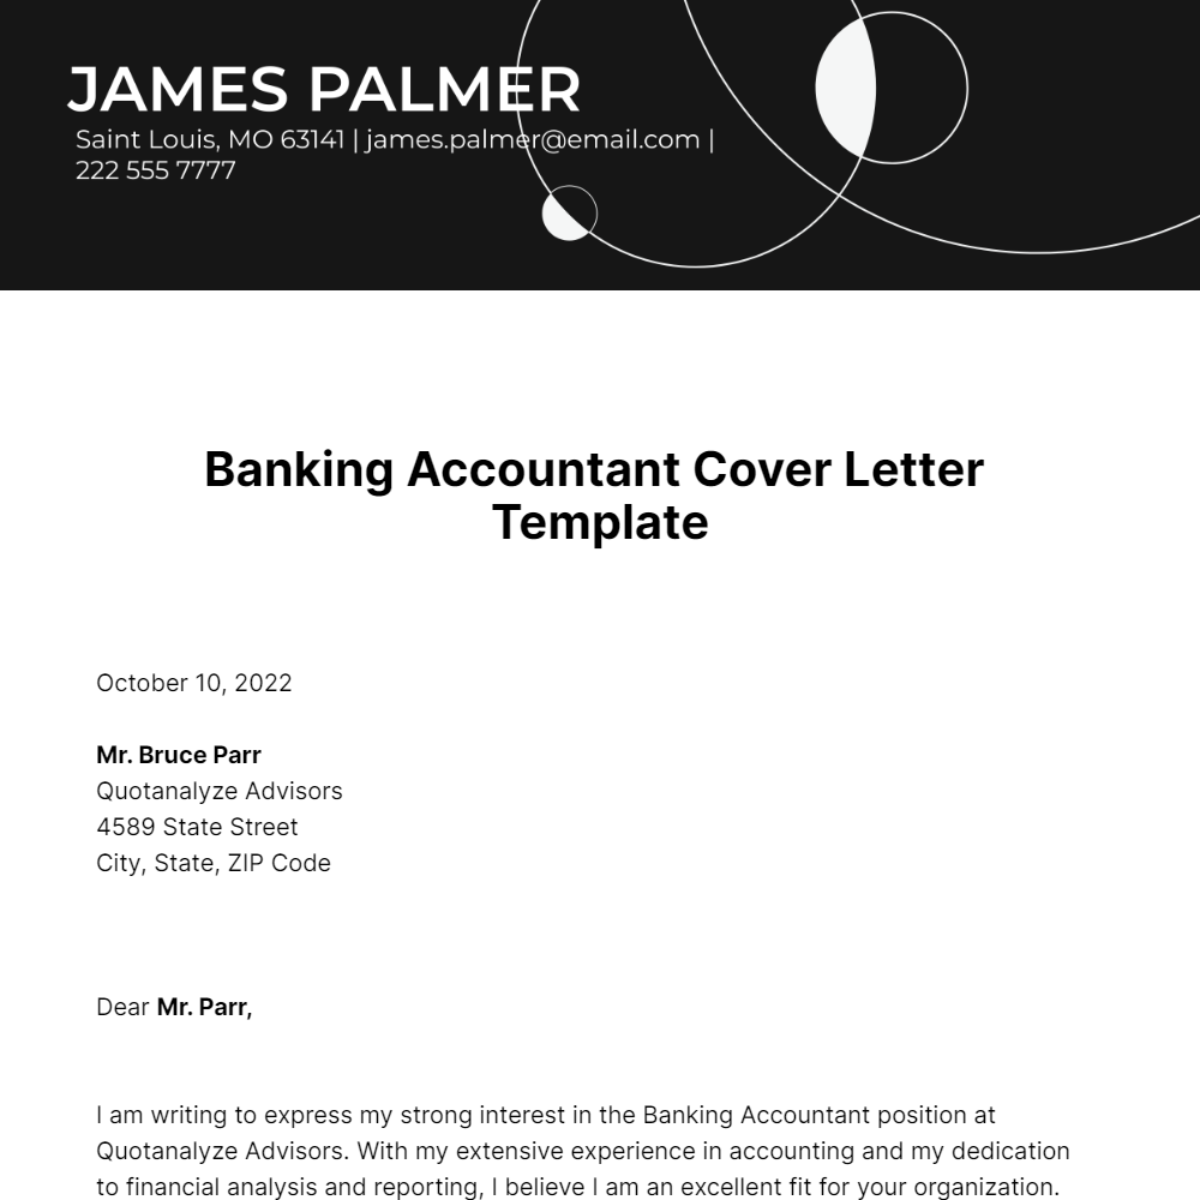 Banking Accountant Cover Letter Template